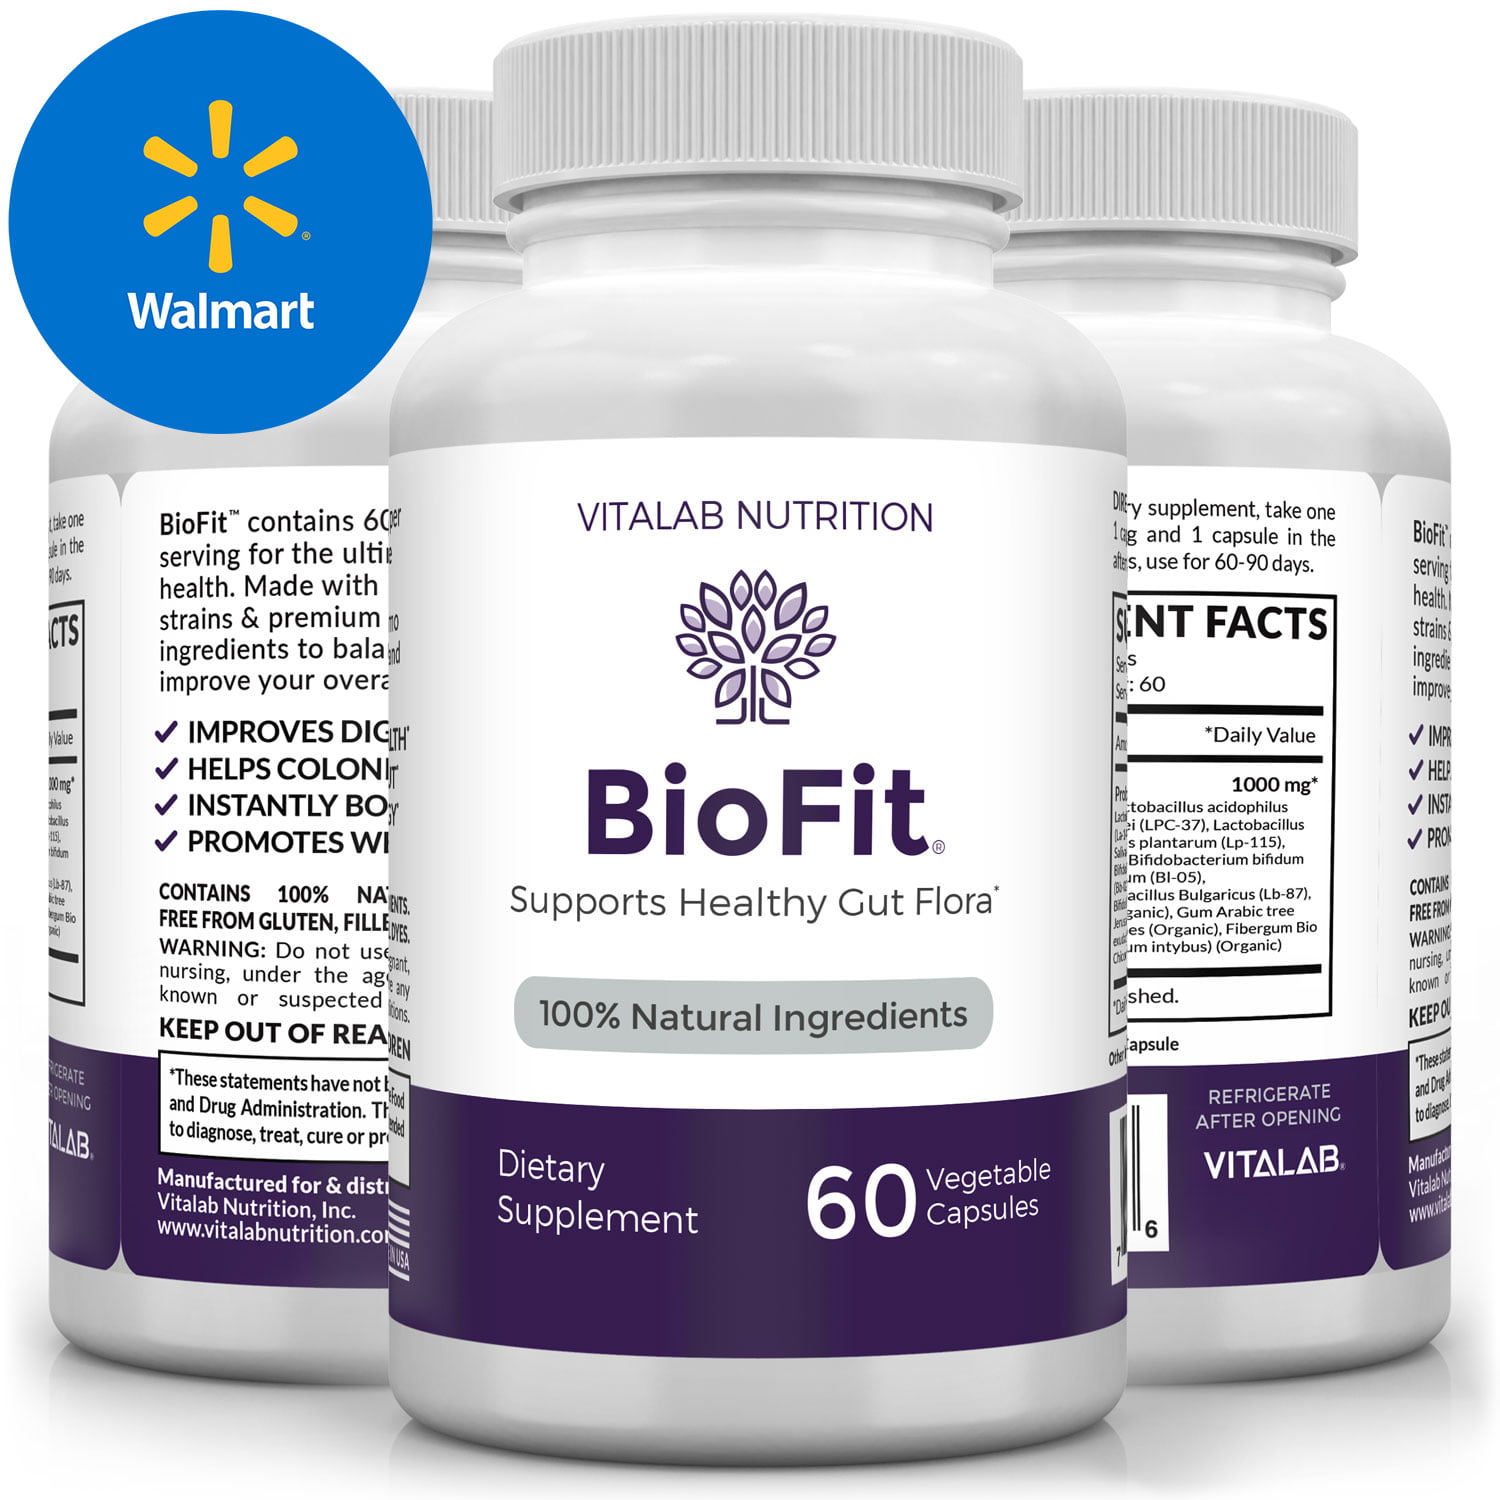 BioFit Review 2021-Is it a Real Probiotic Weight Loss Pill or Scam? Biofit  Weight Loss Supplement Review 2021 - The Online Sellers